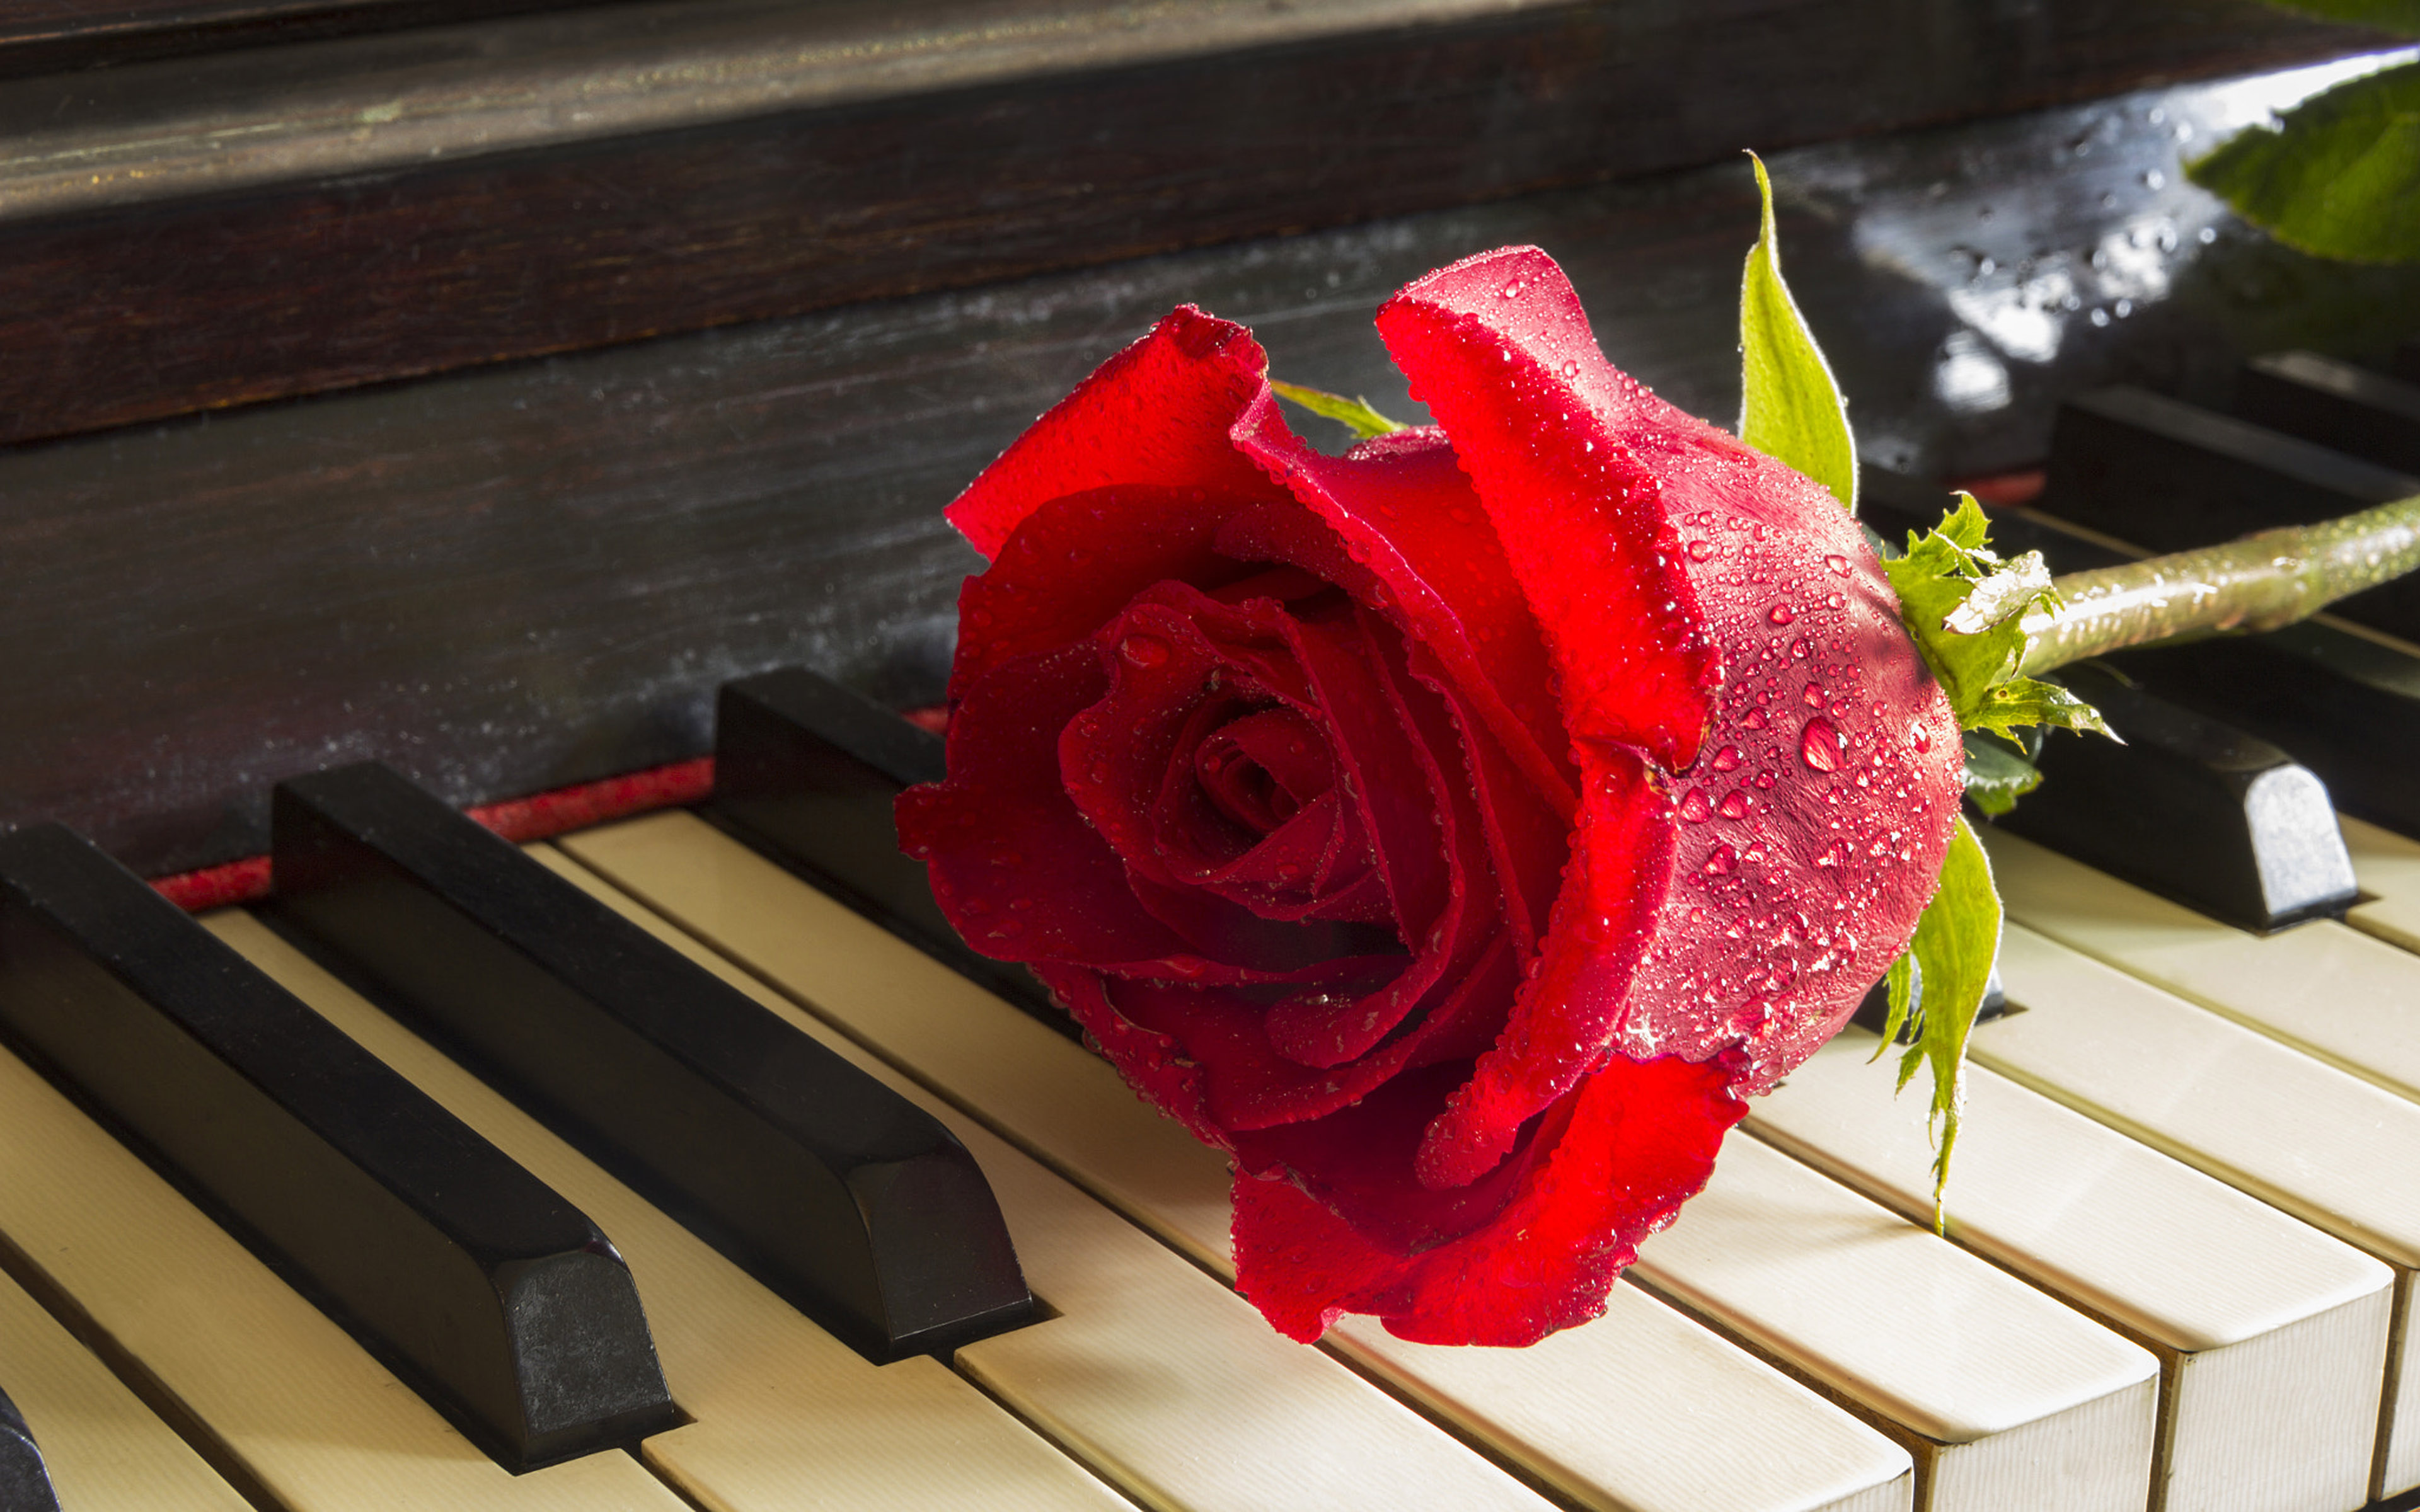 Red Rose On Piano Relaxing Music Meditation Desktop Hd Wallpapers For  Mobile Phones And Computer 3840x2400 : 